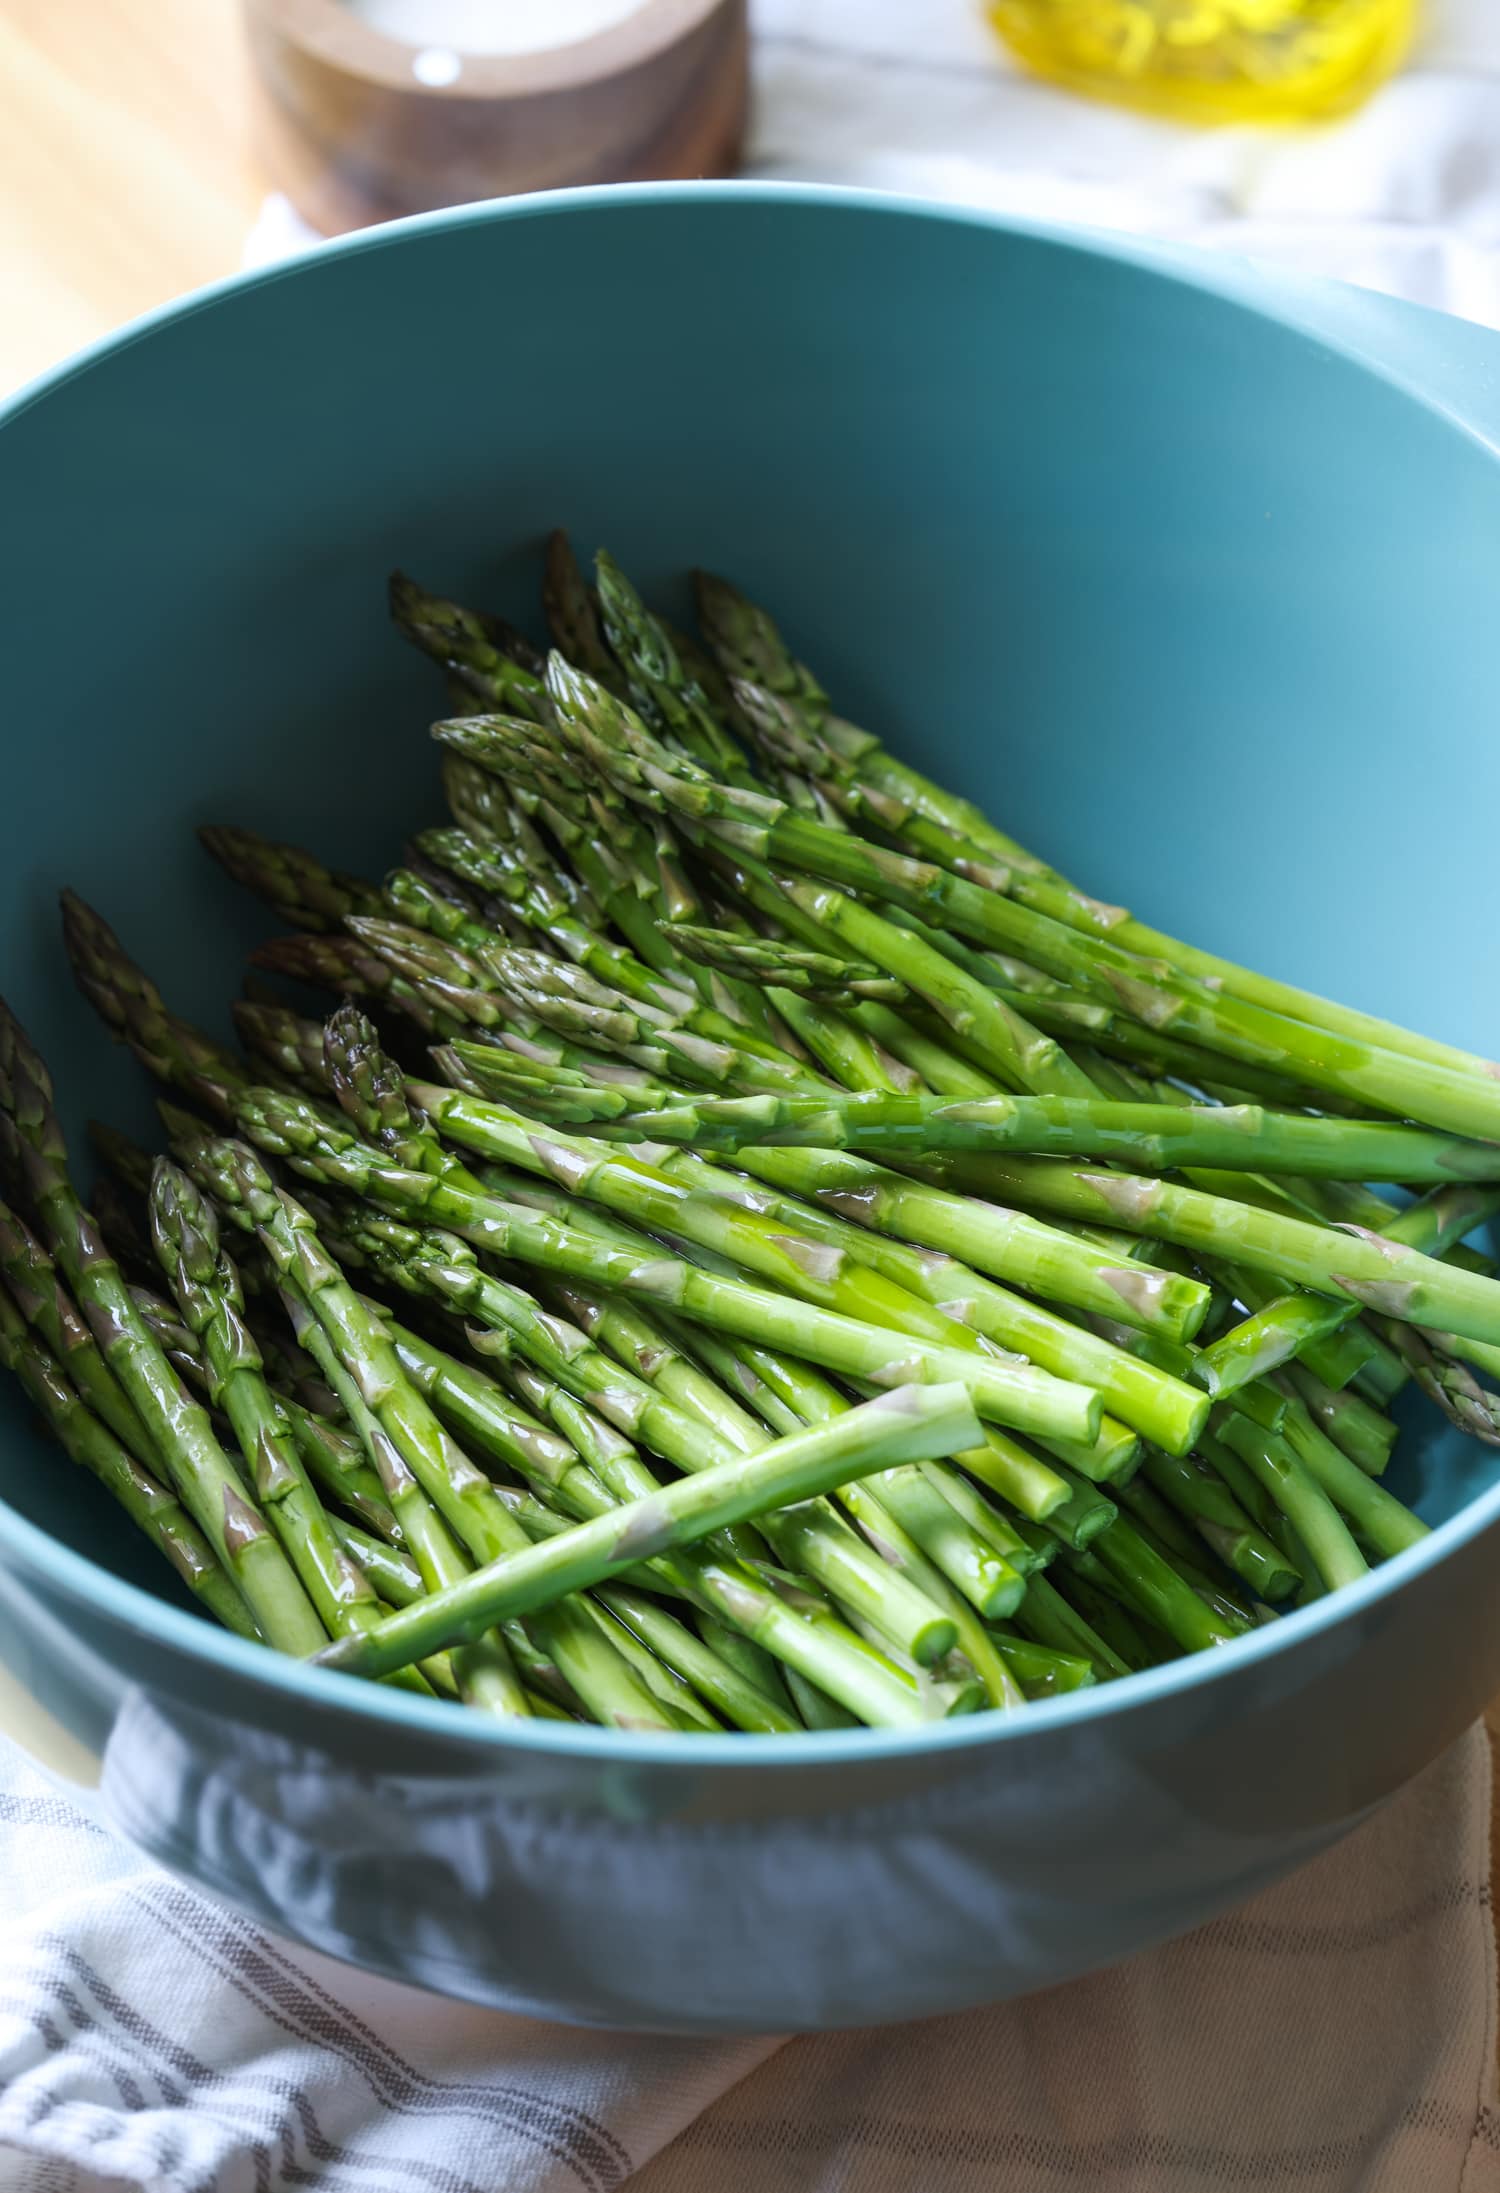 Asparagus spears in a large blue bowl.